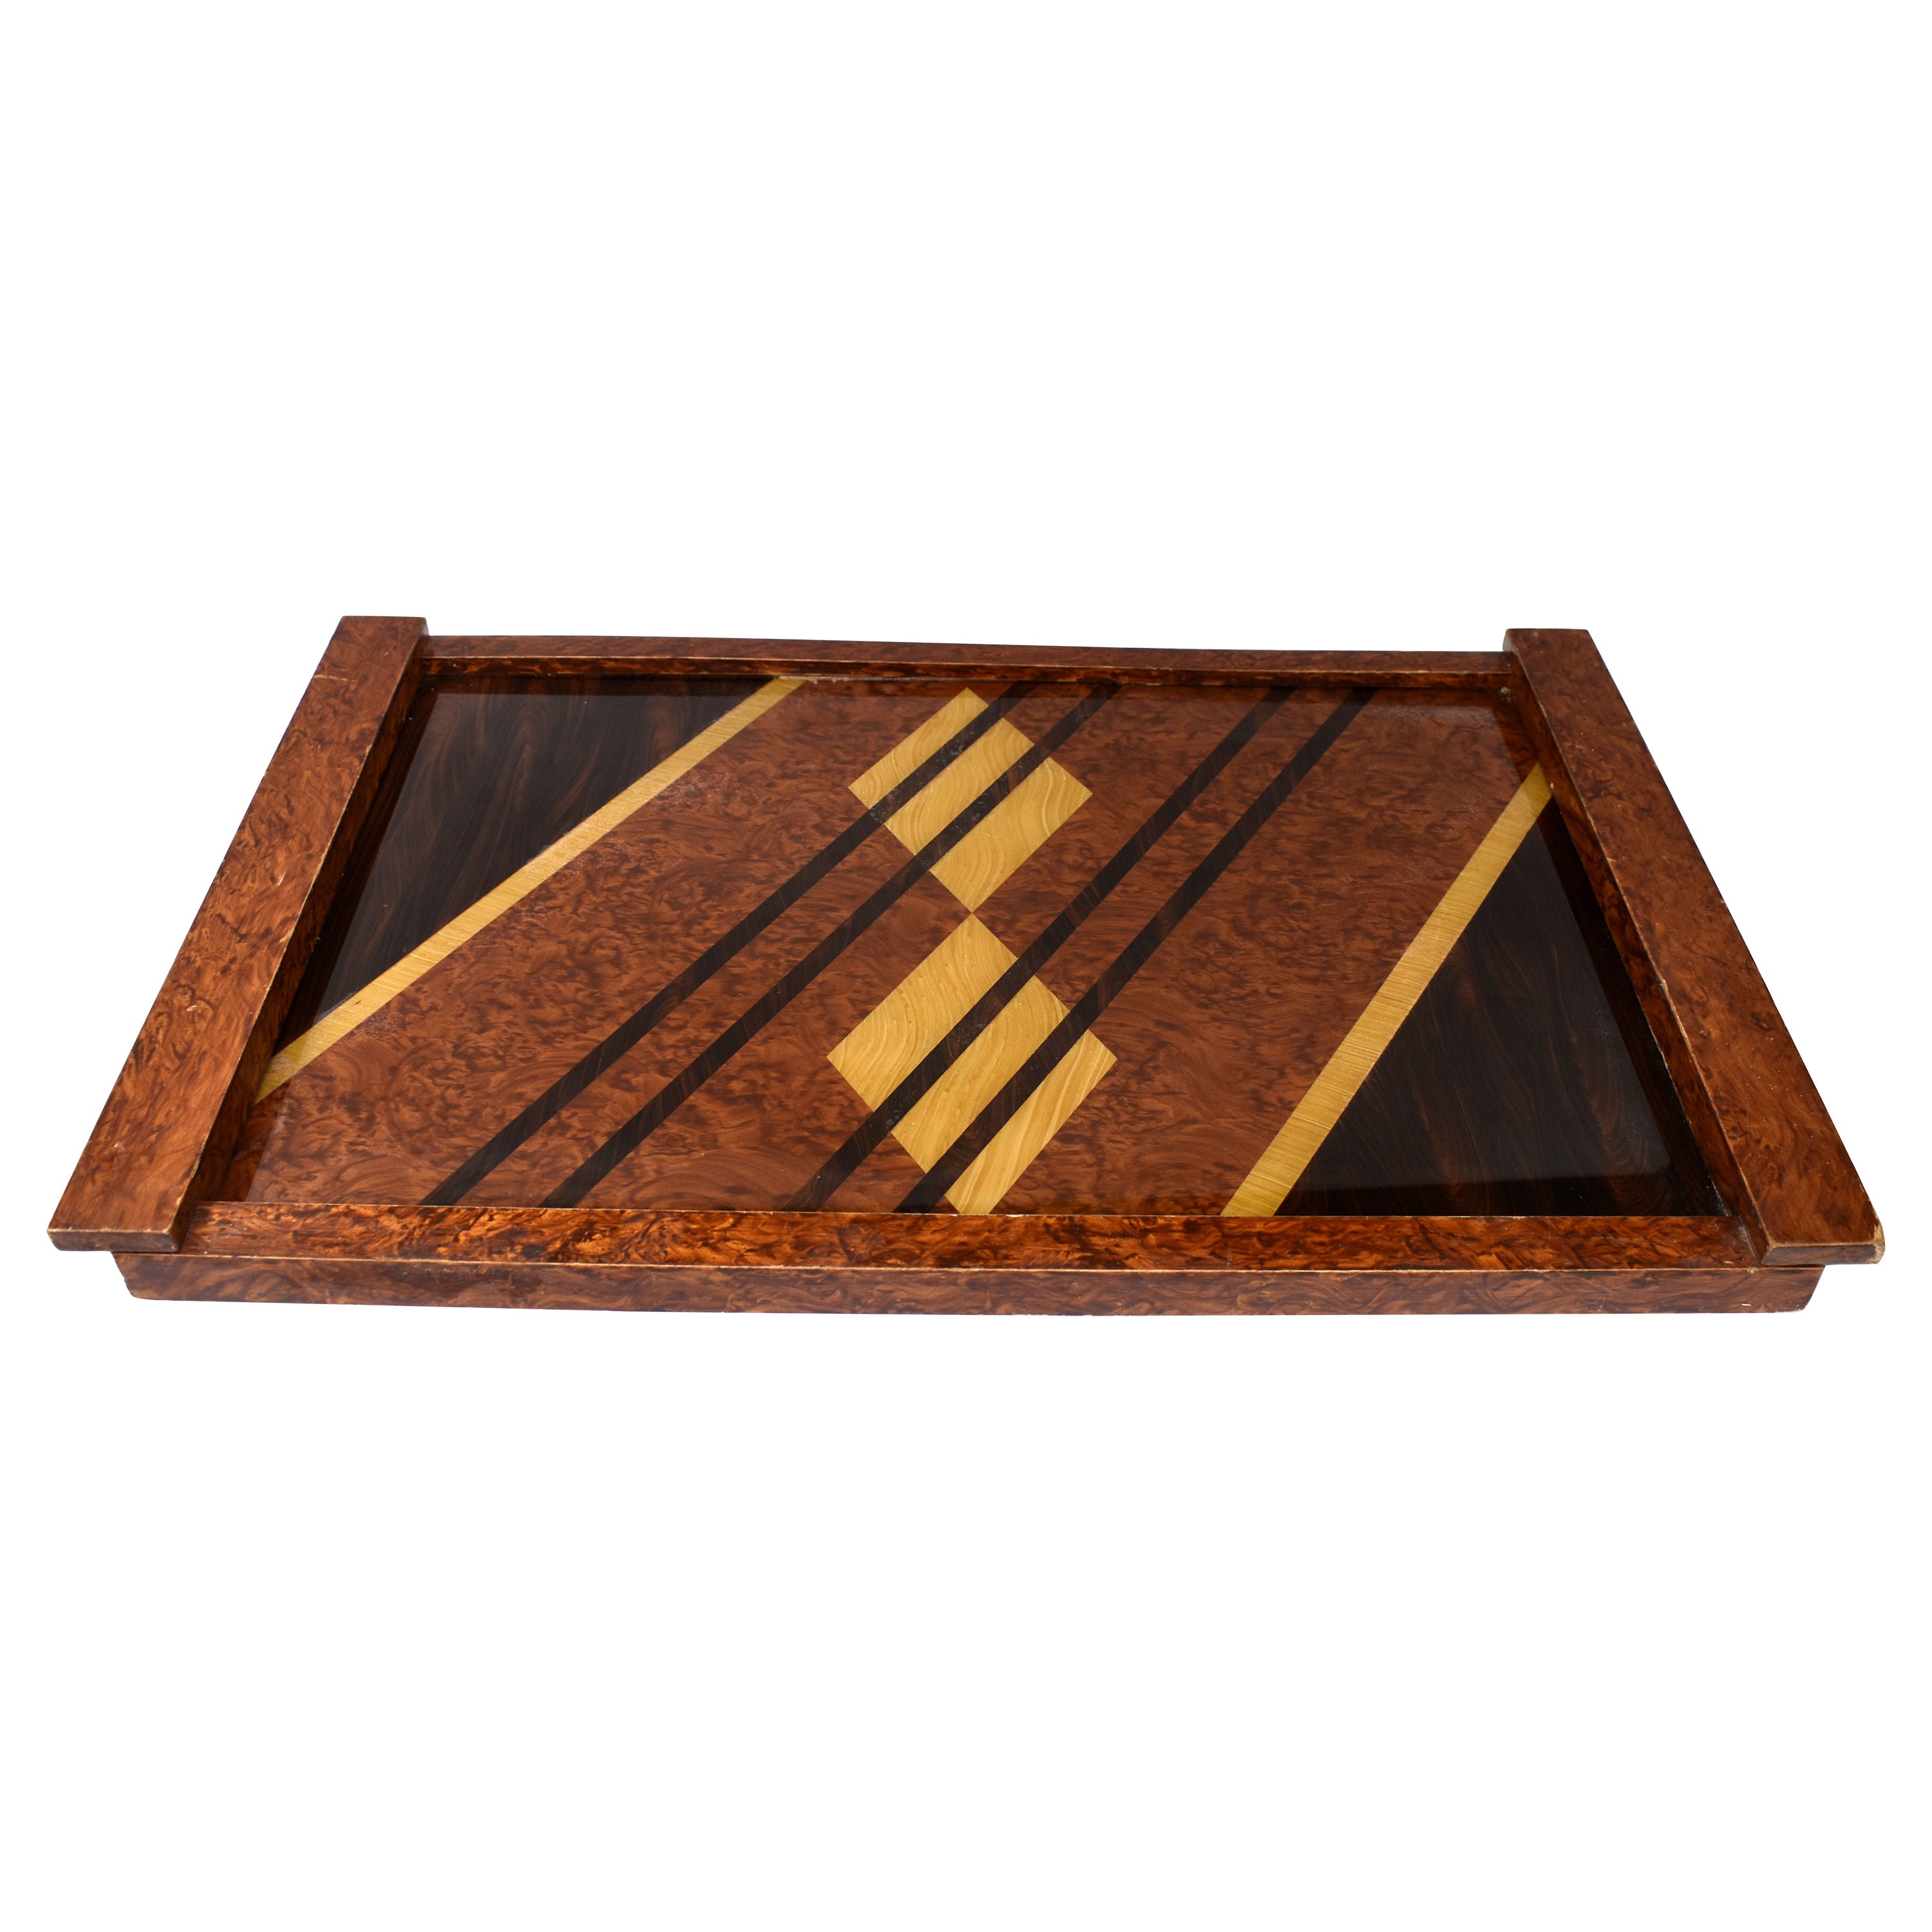 Art Deco Large Geometric Serving Tray, French, c1930